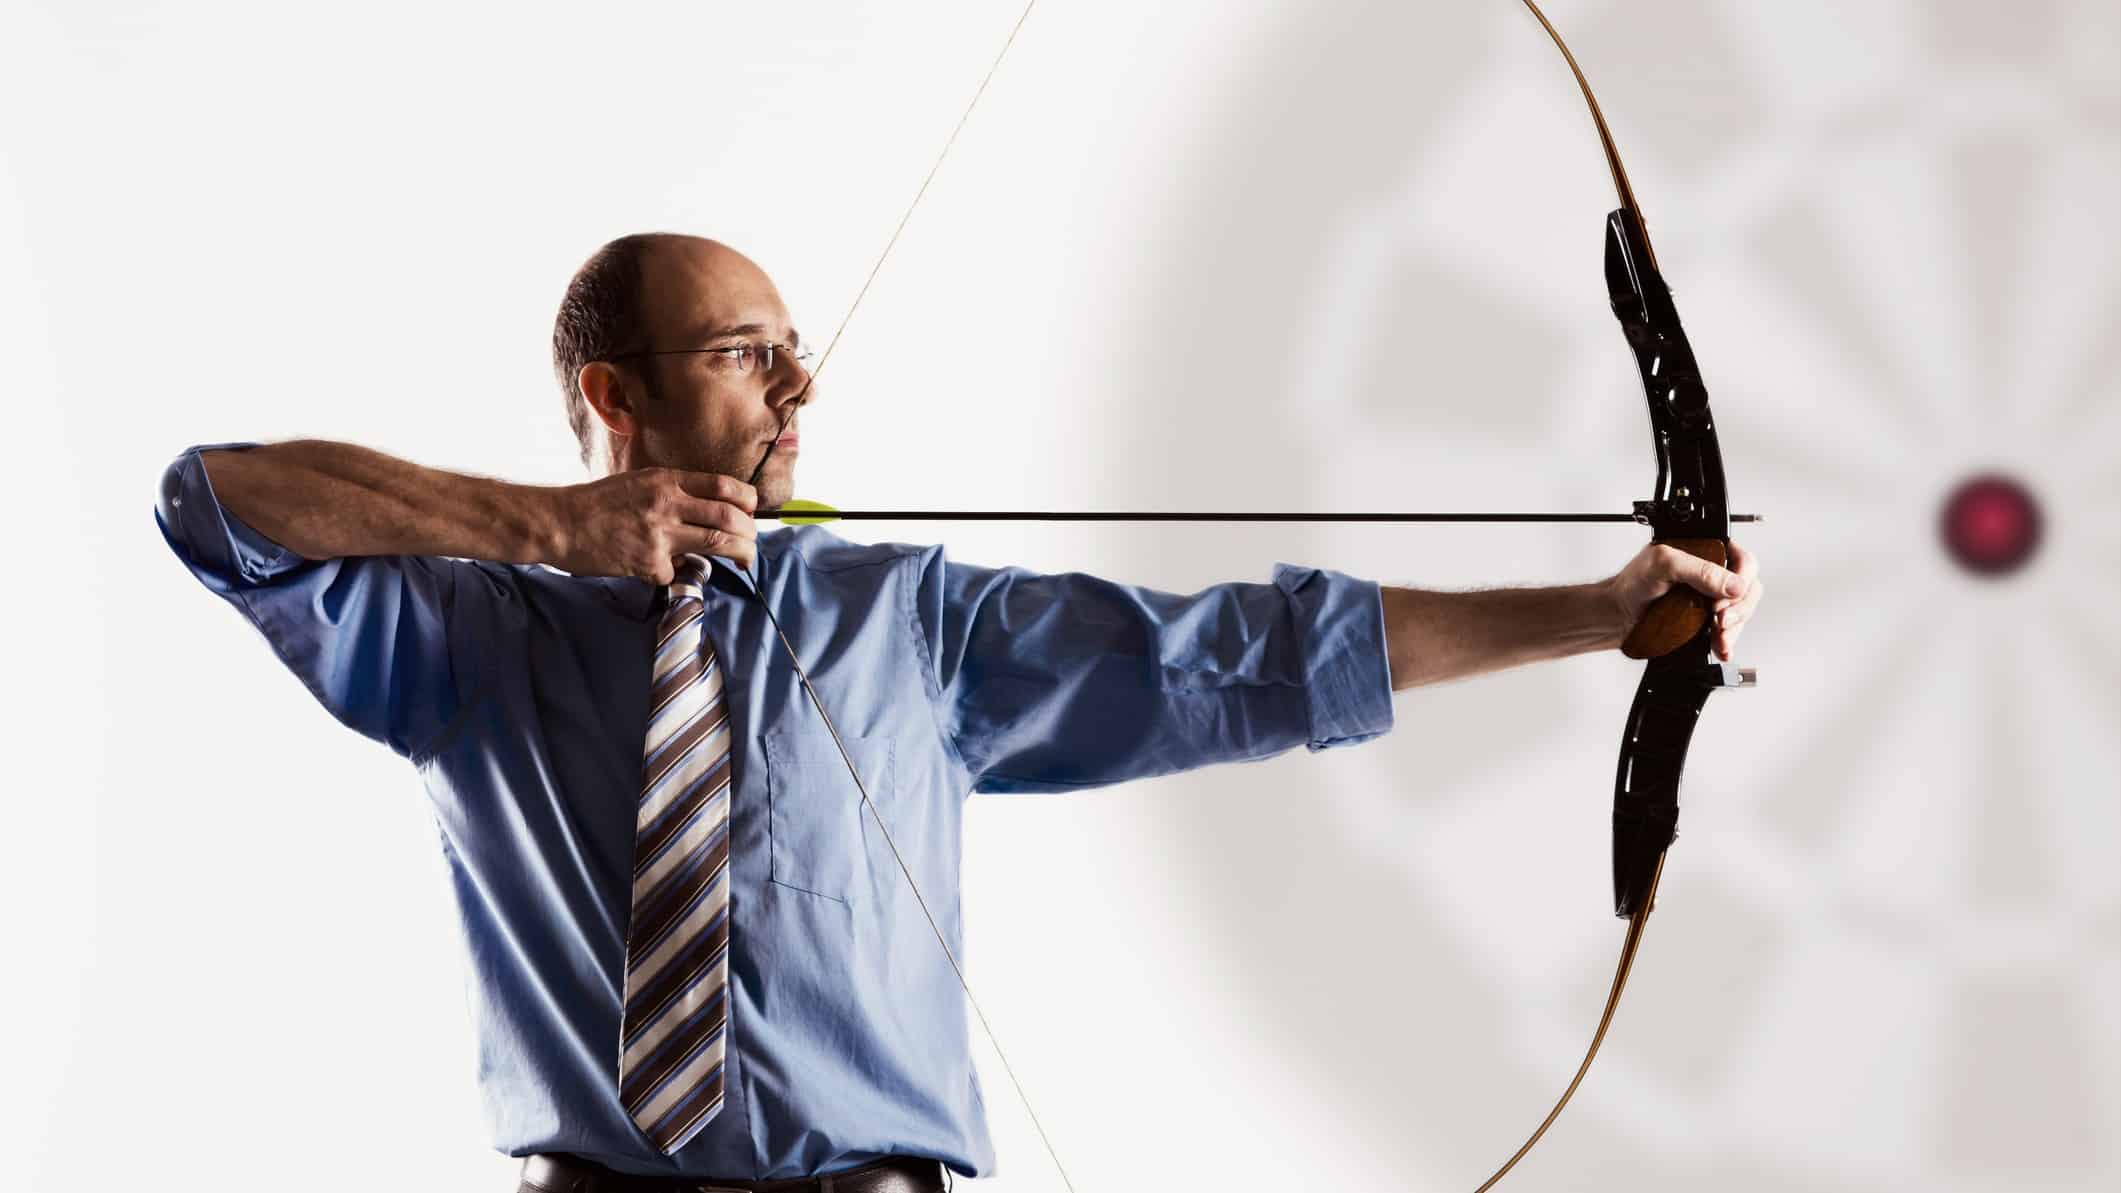 Business executive aiming bow and arrow at target.